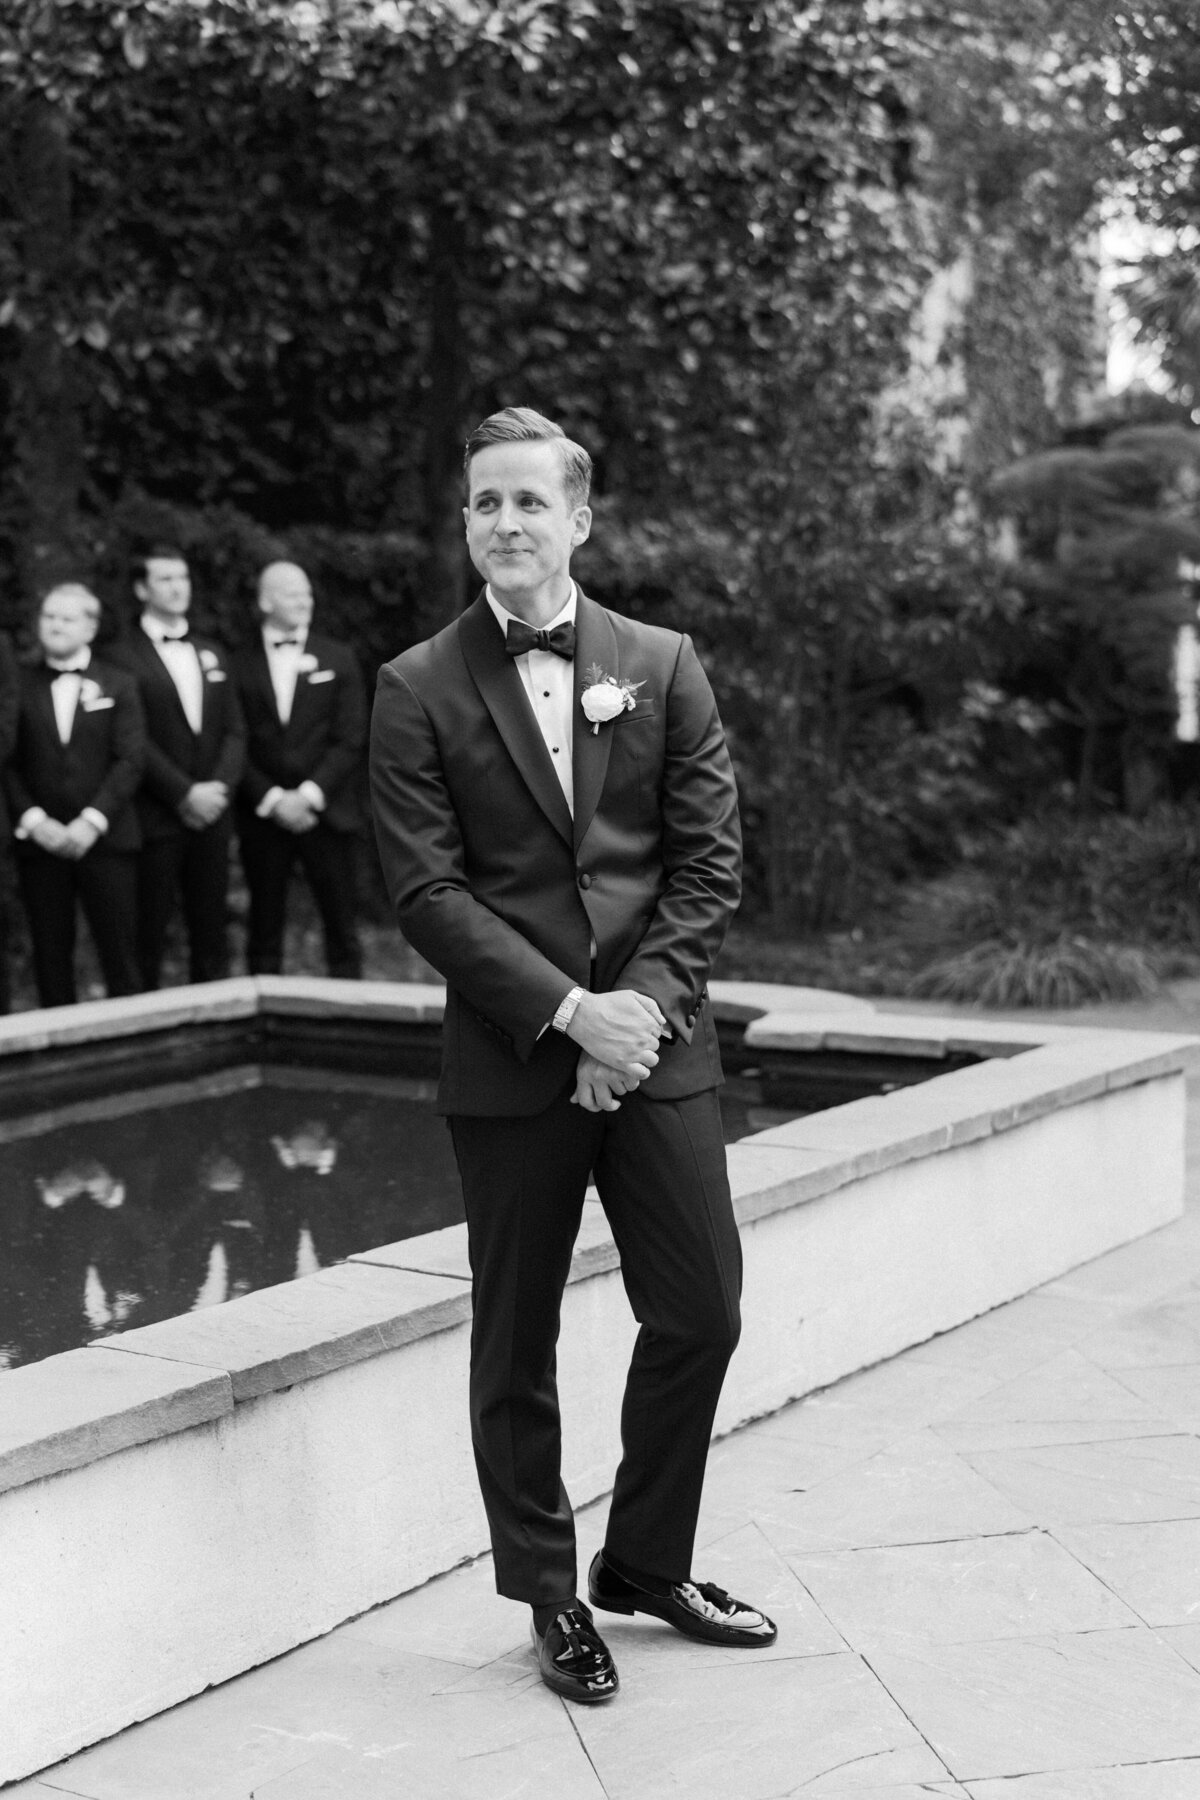 Black and white wedding ceremony photo of groom getting emotional seeing the bride walk down the aisle. Outdoor garden spring wedding ceremony in downtown Charleston. Kailee DiMeglio Photography.